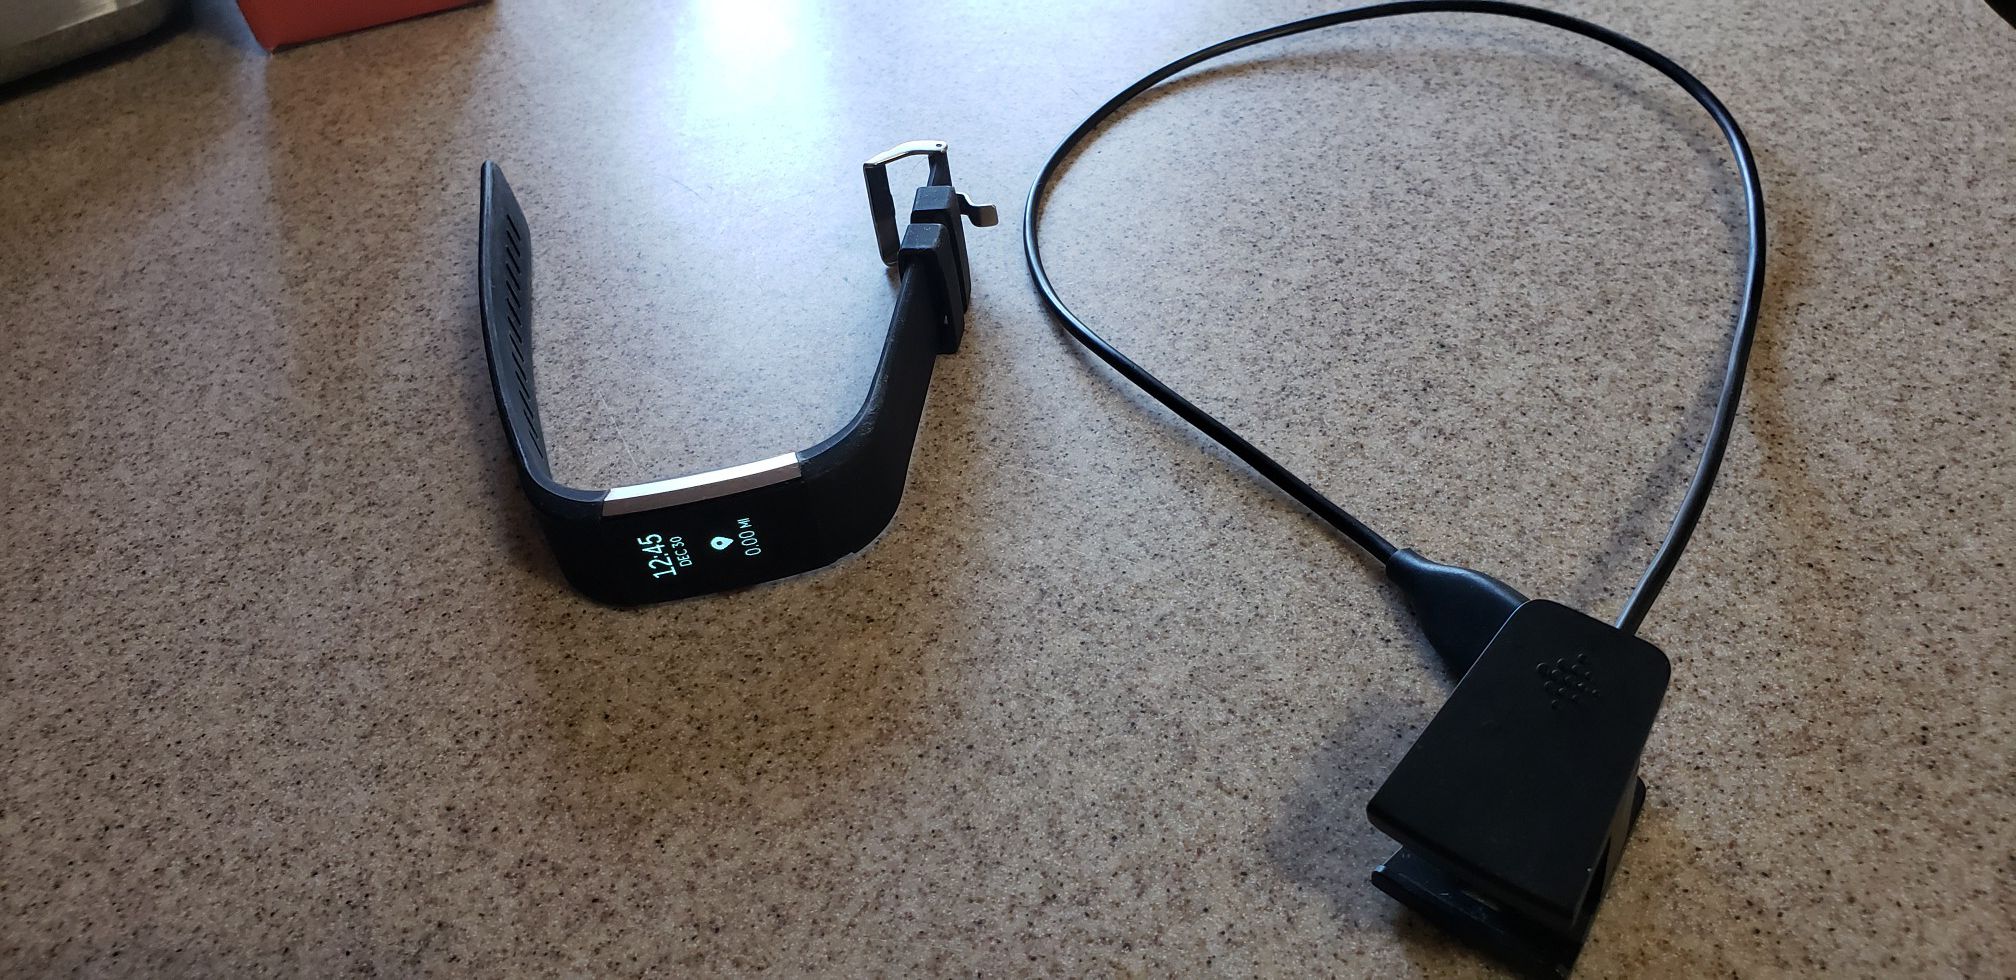 Fitbit with charge cable